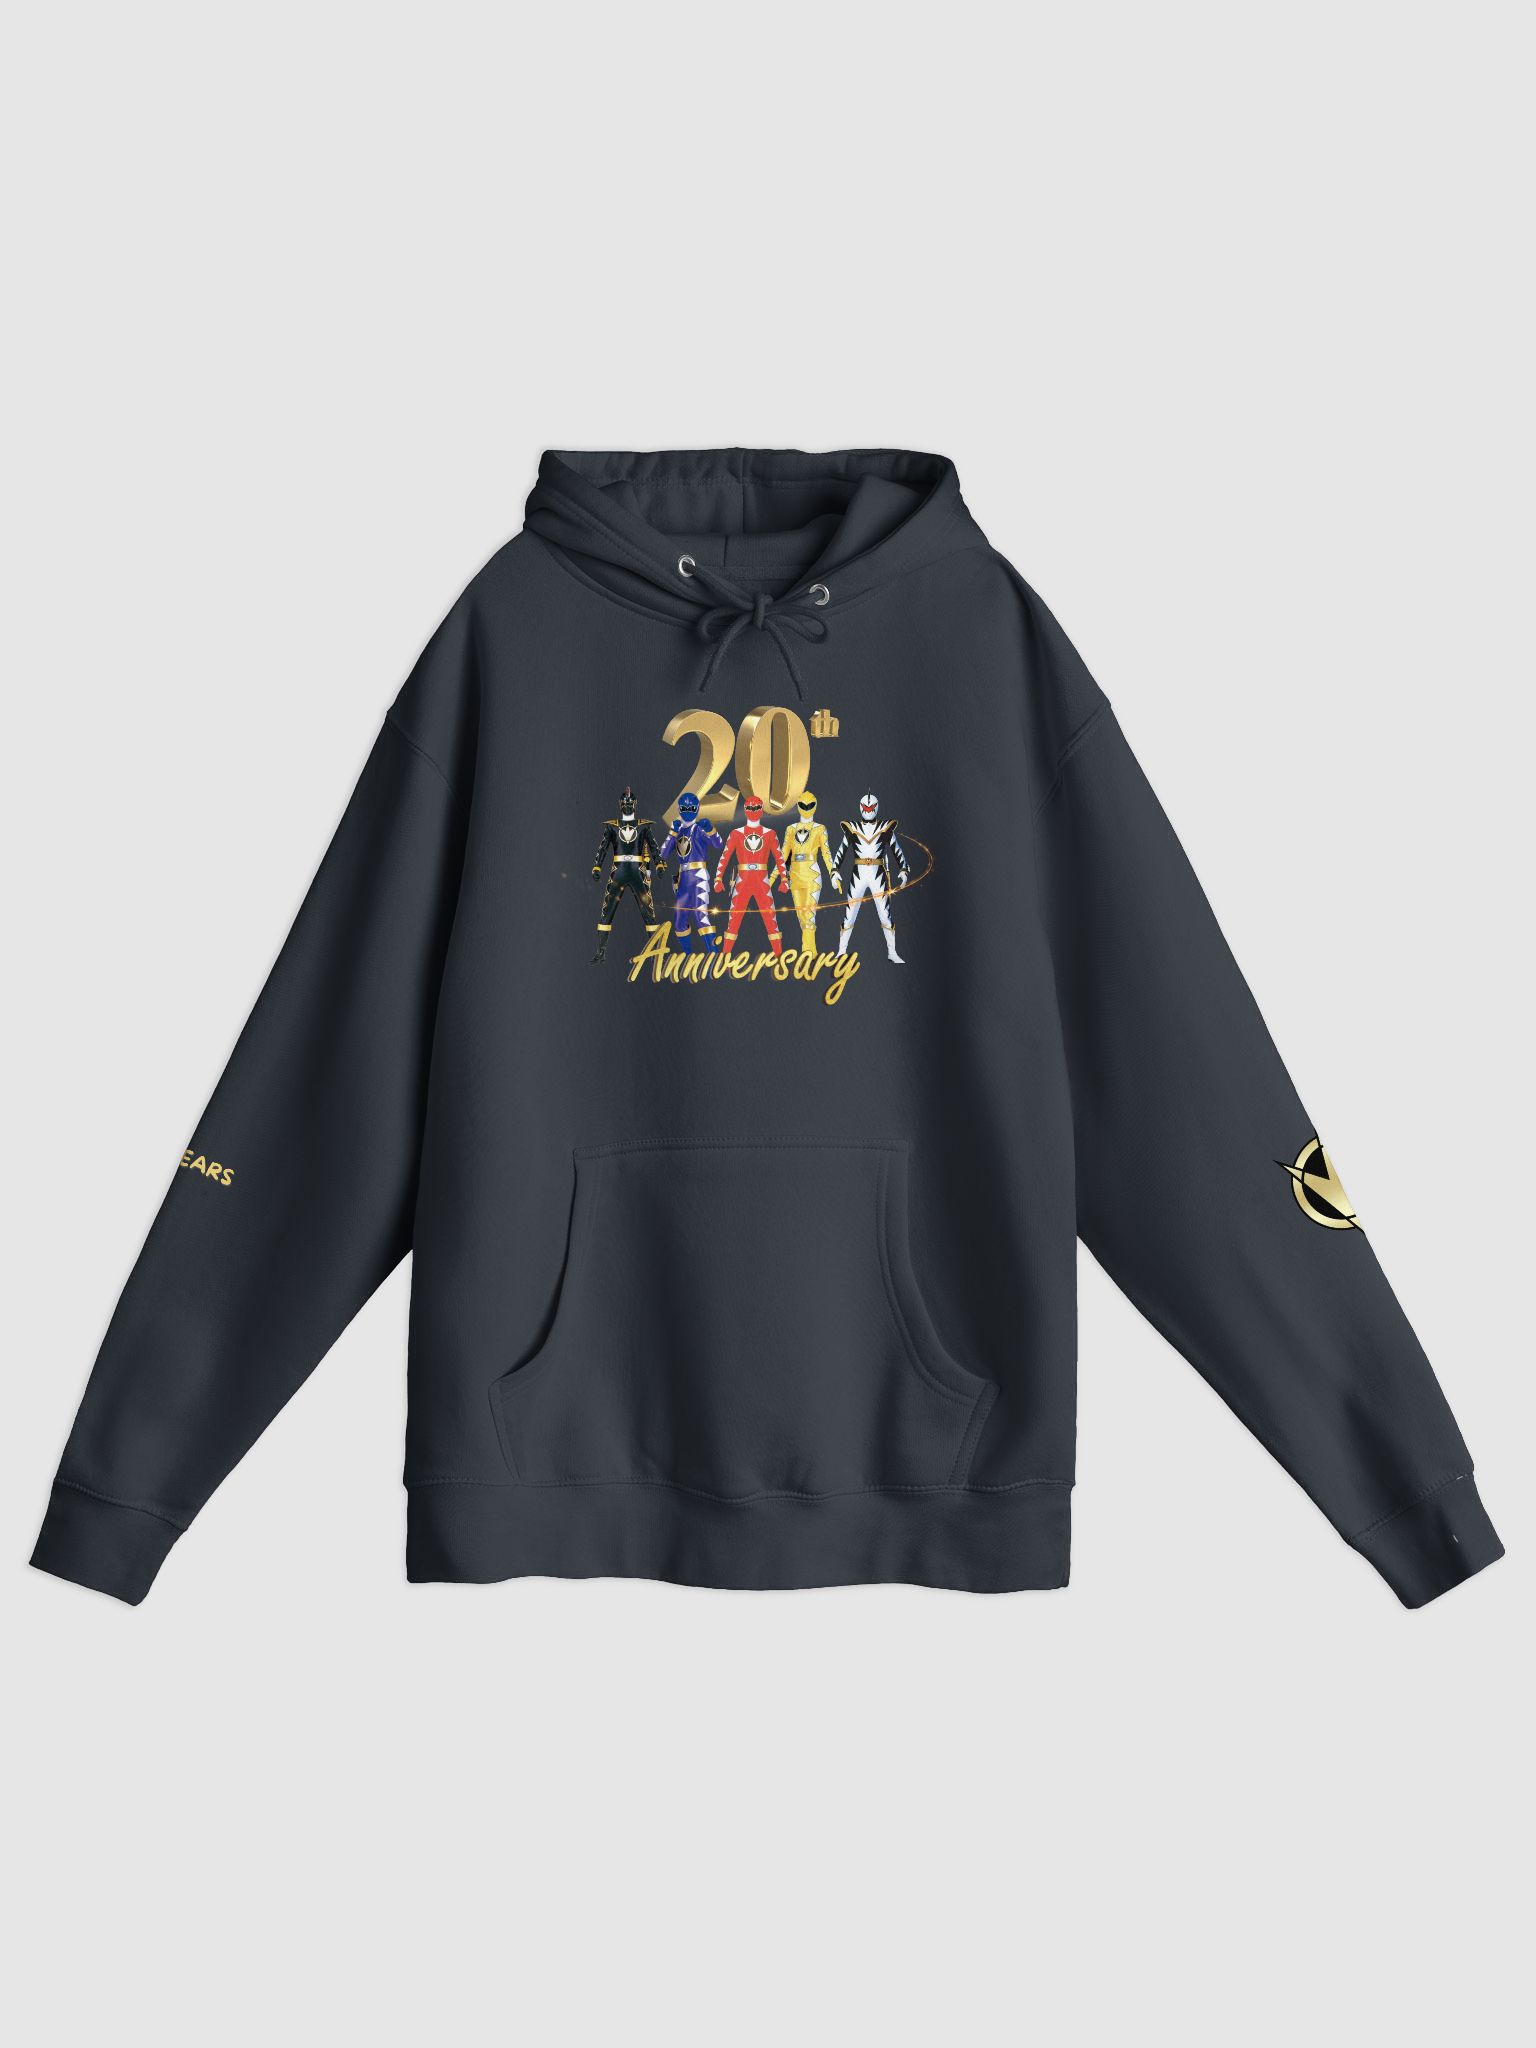 Limited Edition 20th Anniversary Hoodie